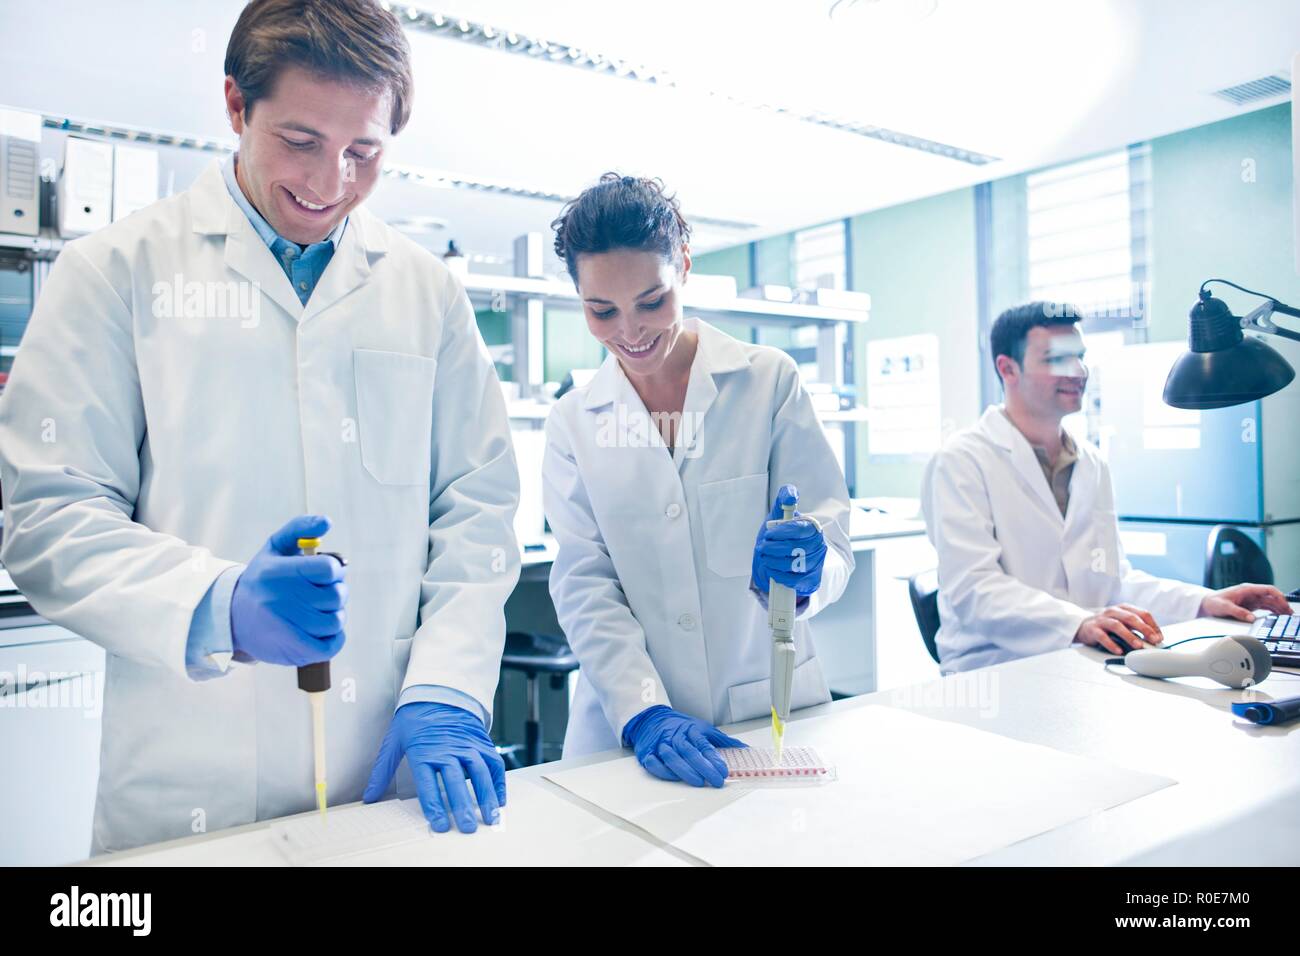 Scientists using pipettes in the laboratory. Stock Photo